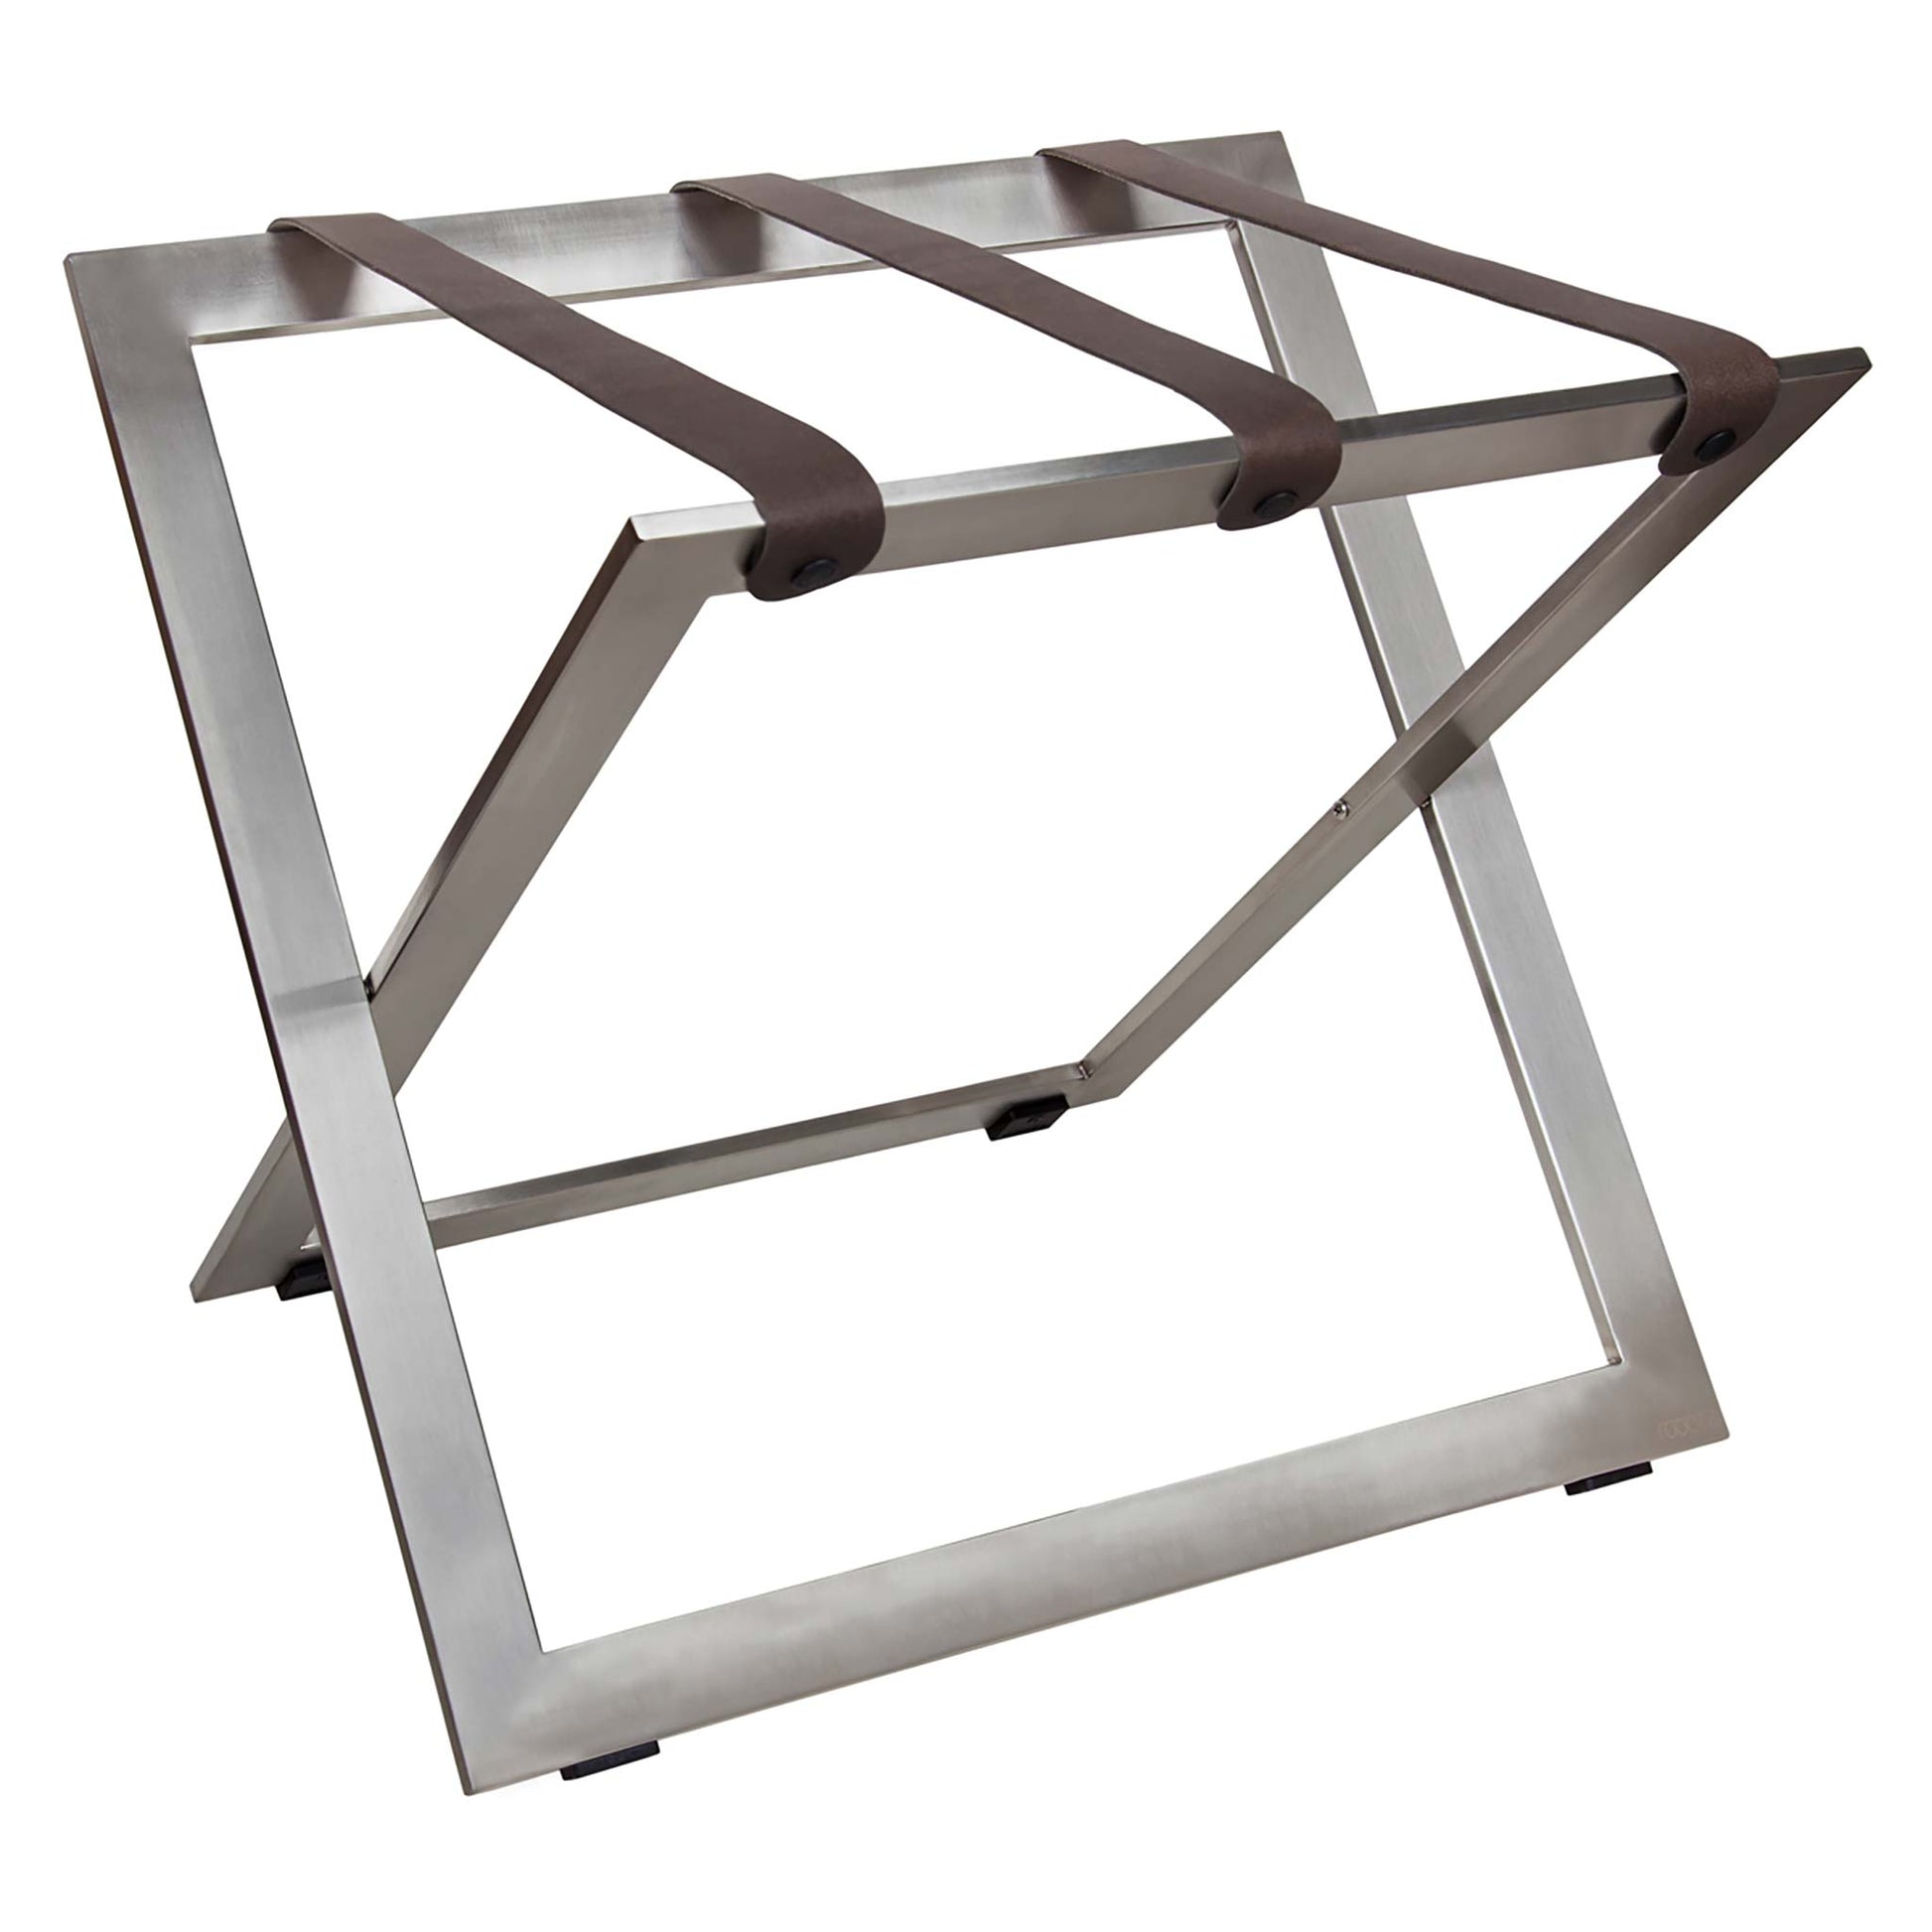 Roootz stainless steel compact hotel luggage rack with grey leather straps